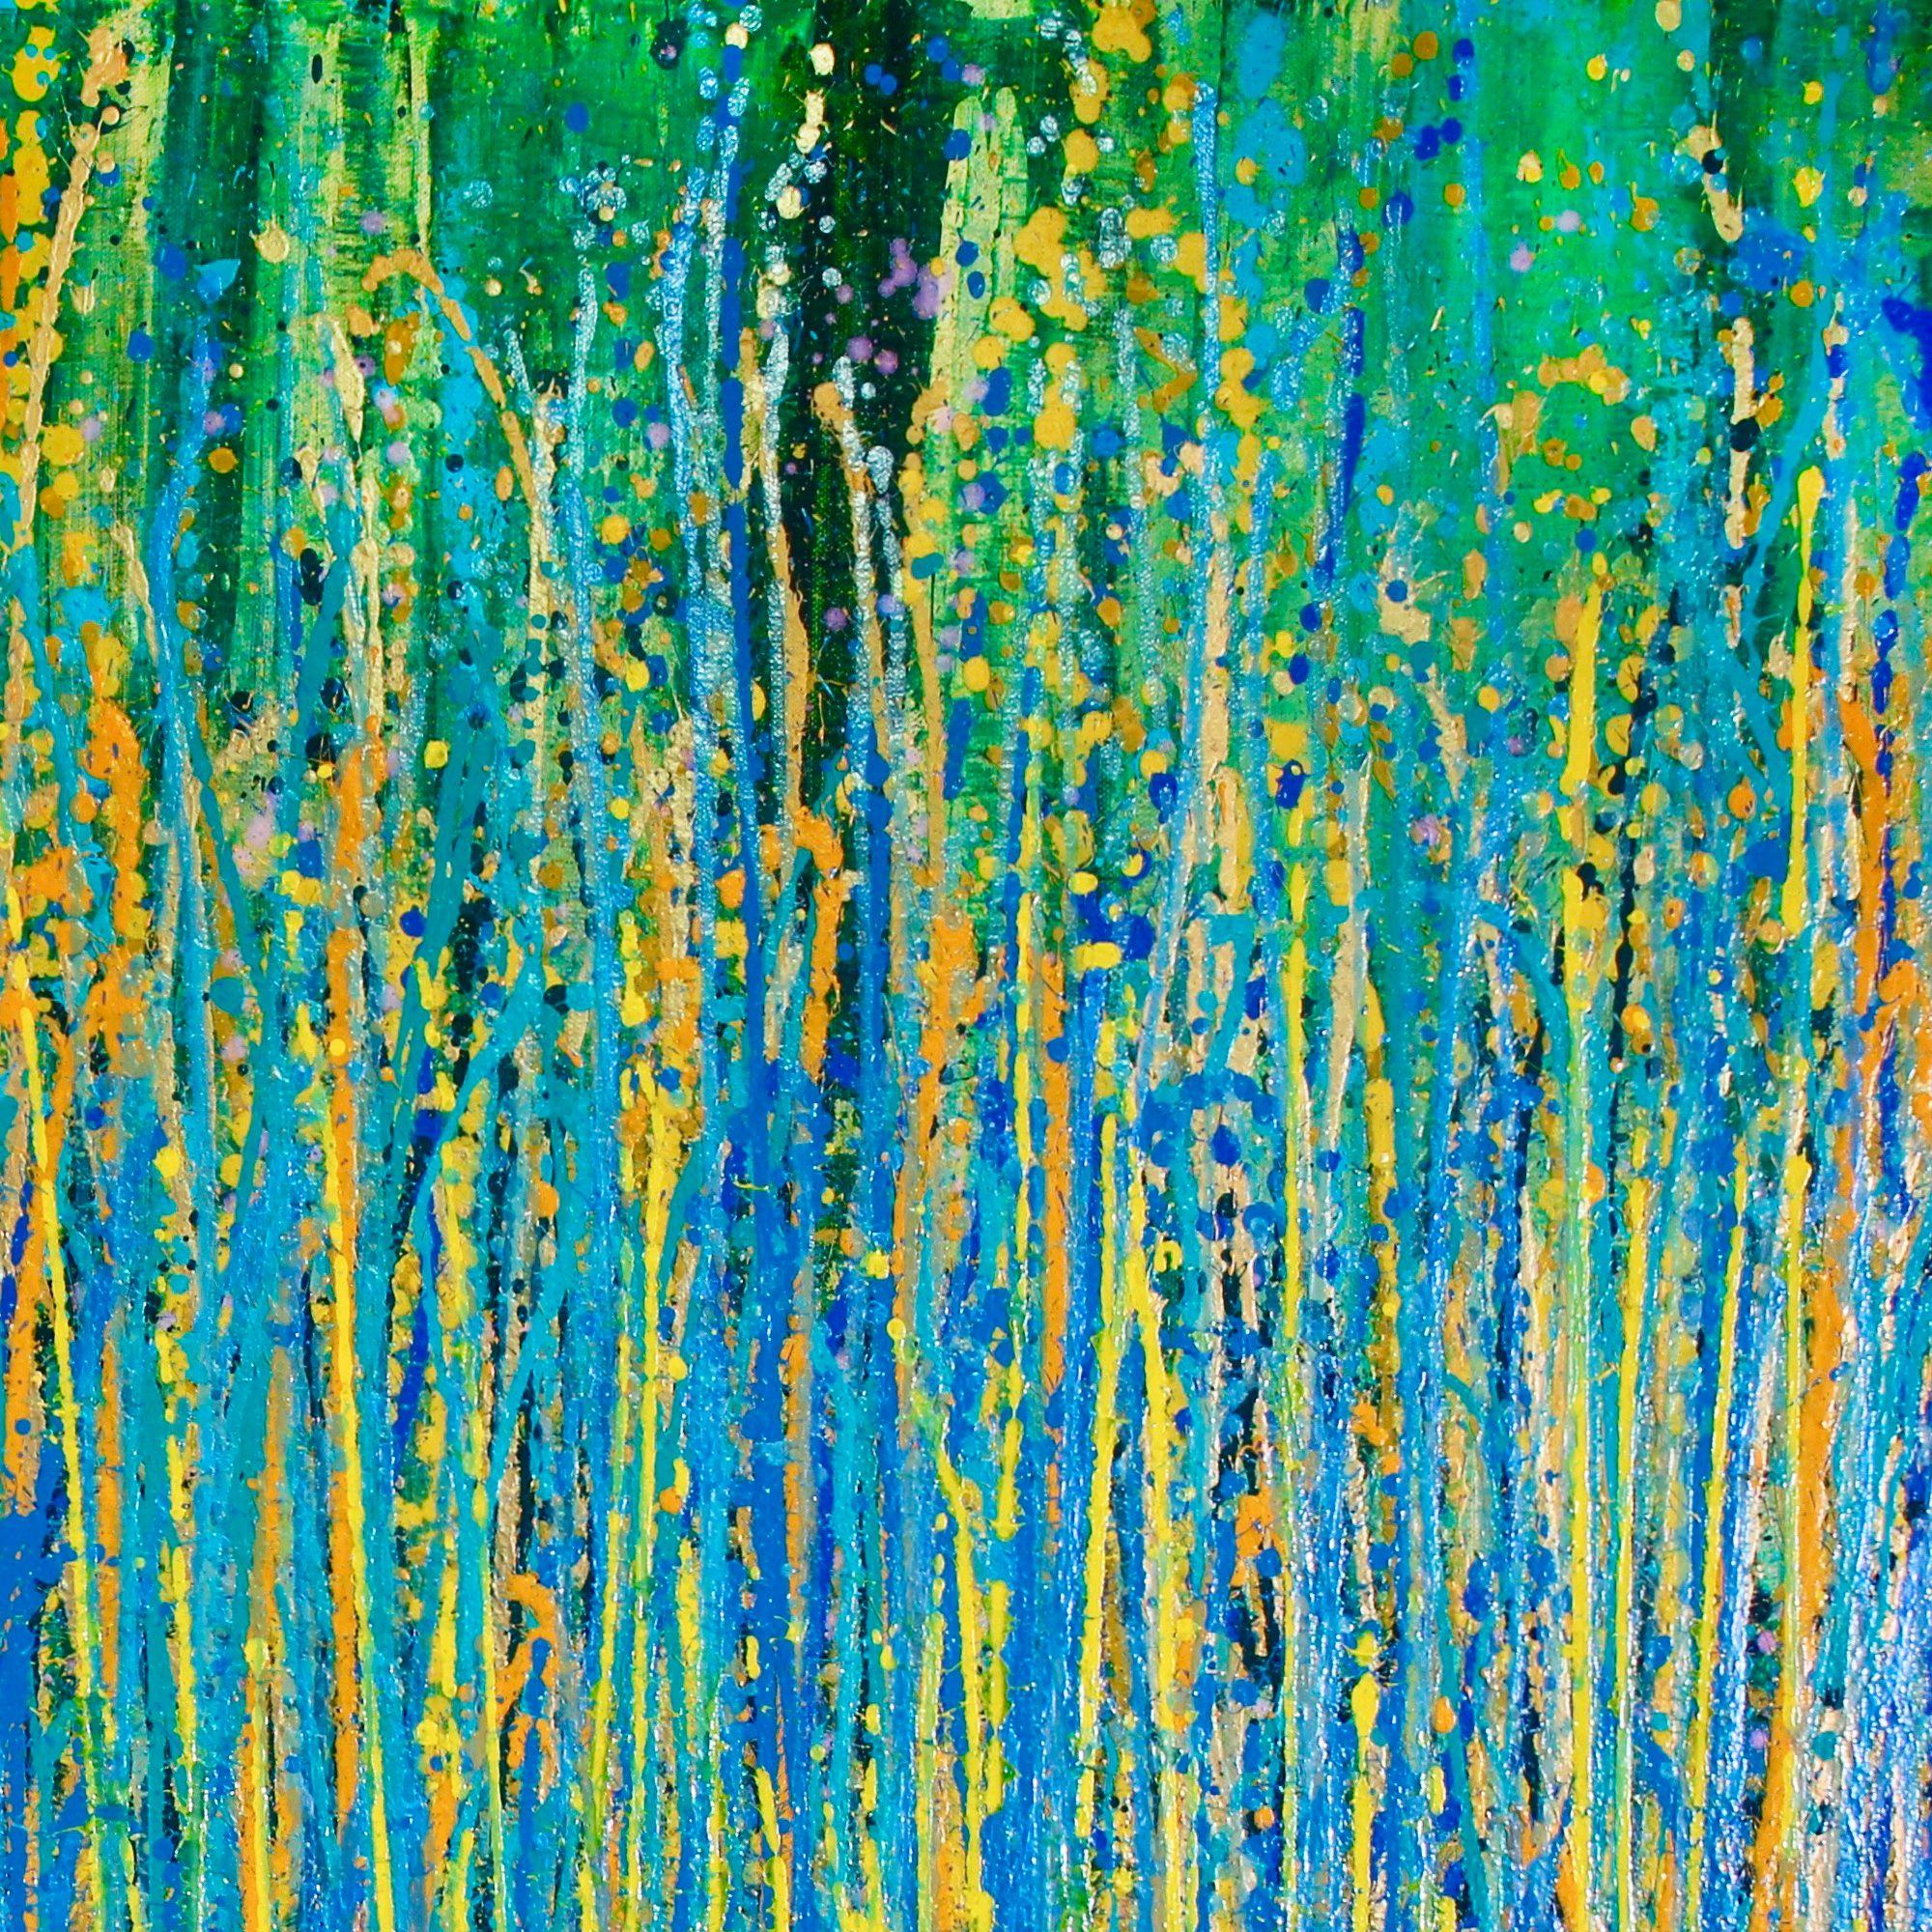 Under the morning sun, Painting, Acrylic on Canvas - Blue Abstract Painting by Nestor Toro